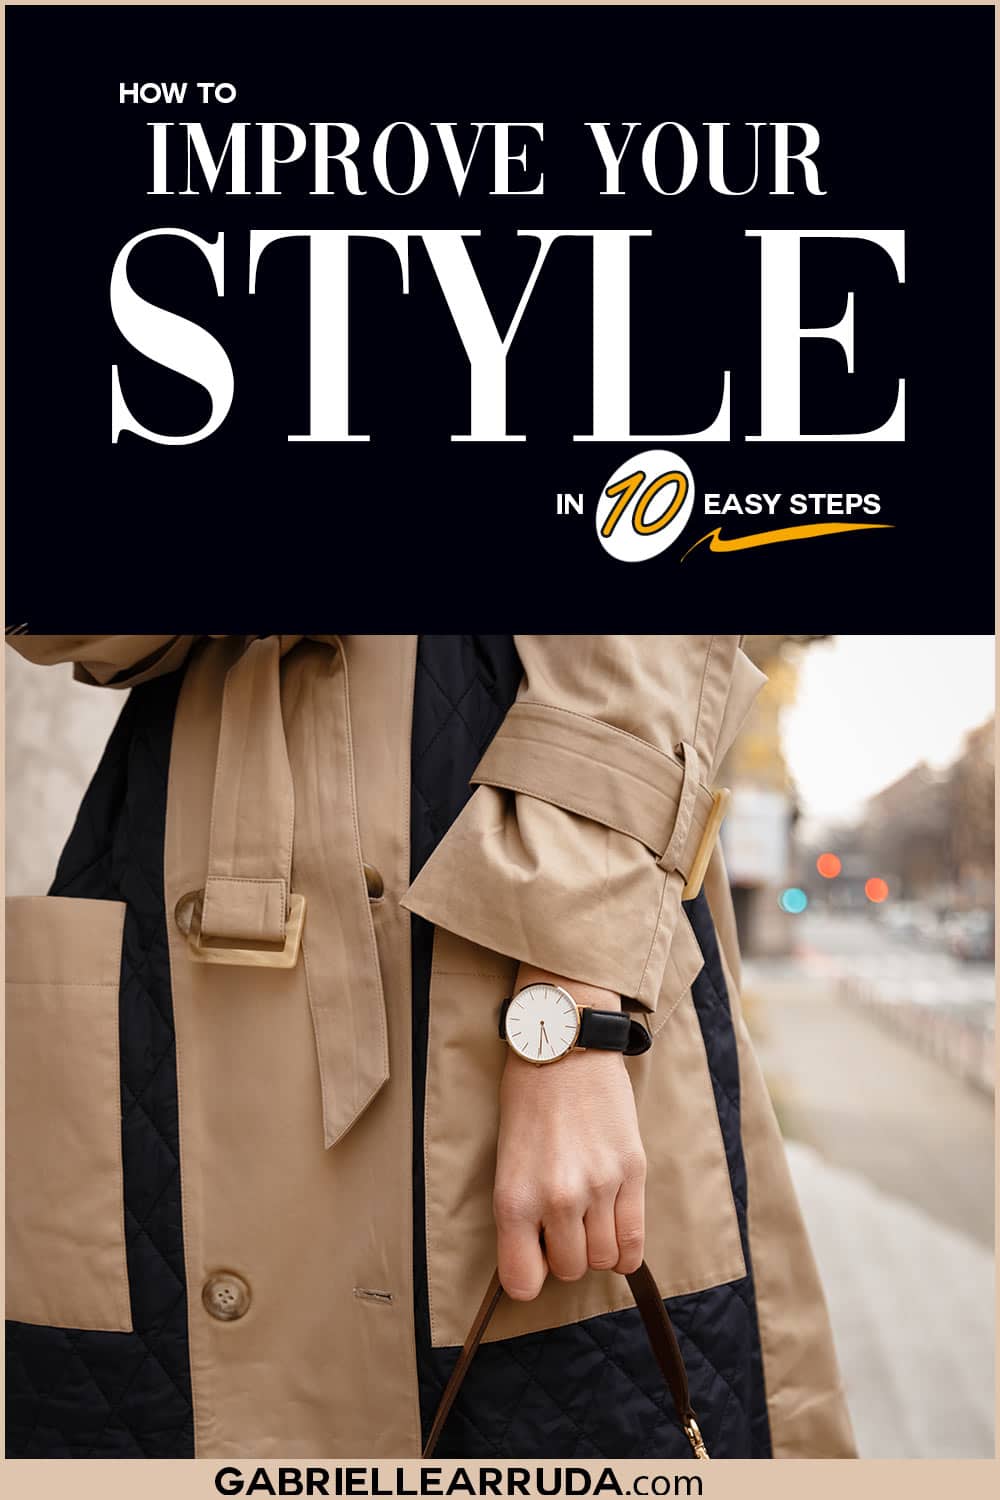 how to improve you style in 10 easy steps - image of chic woman in trouser with watch and purse on city street